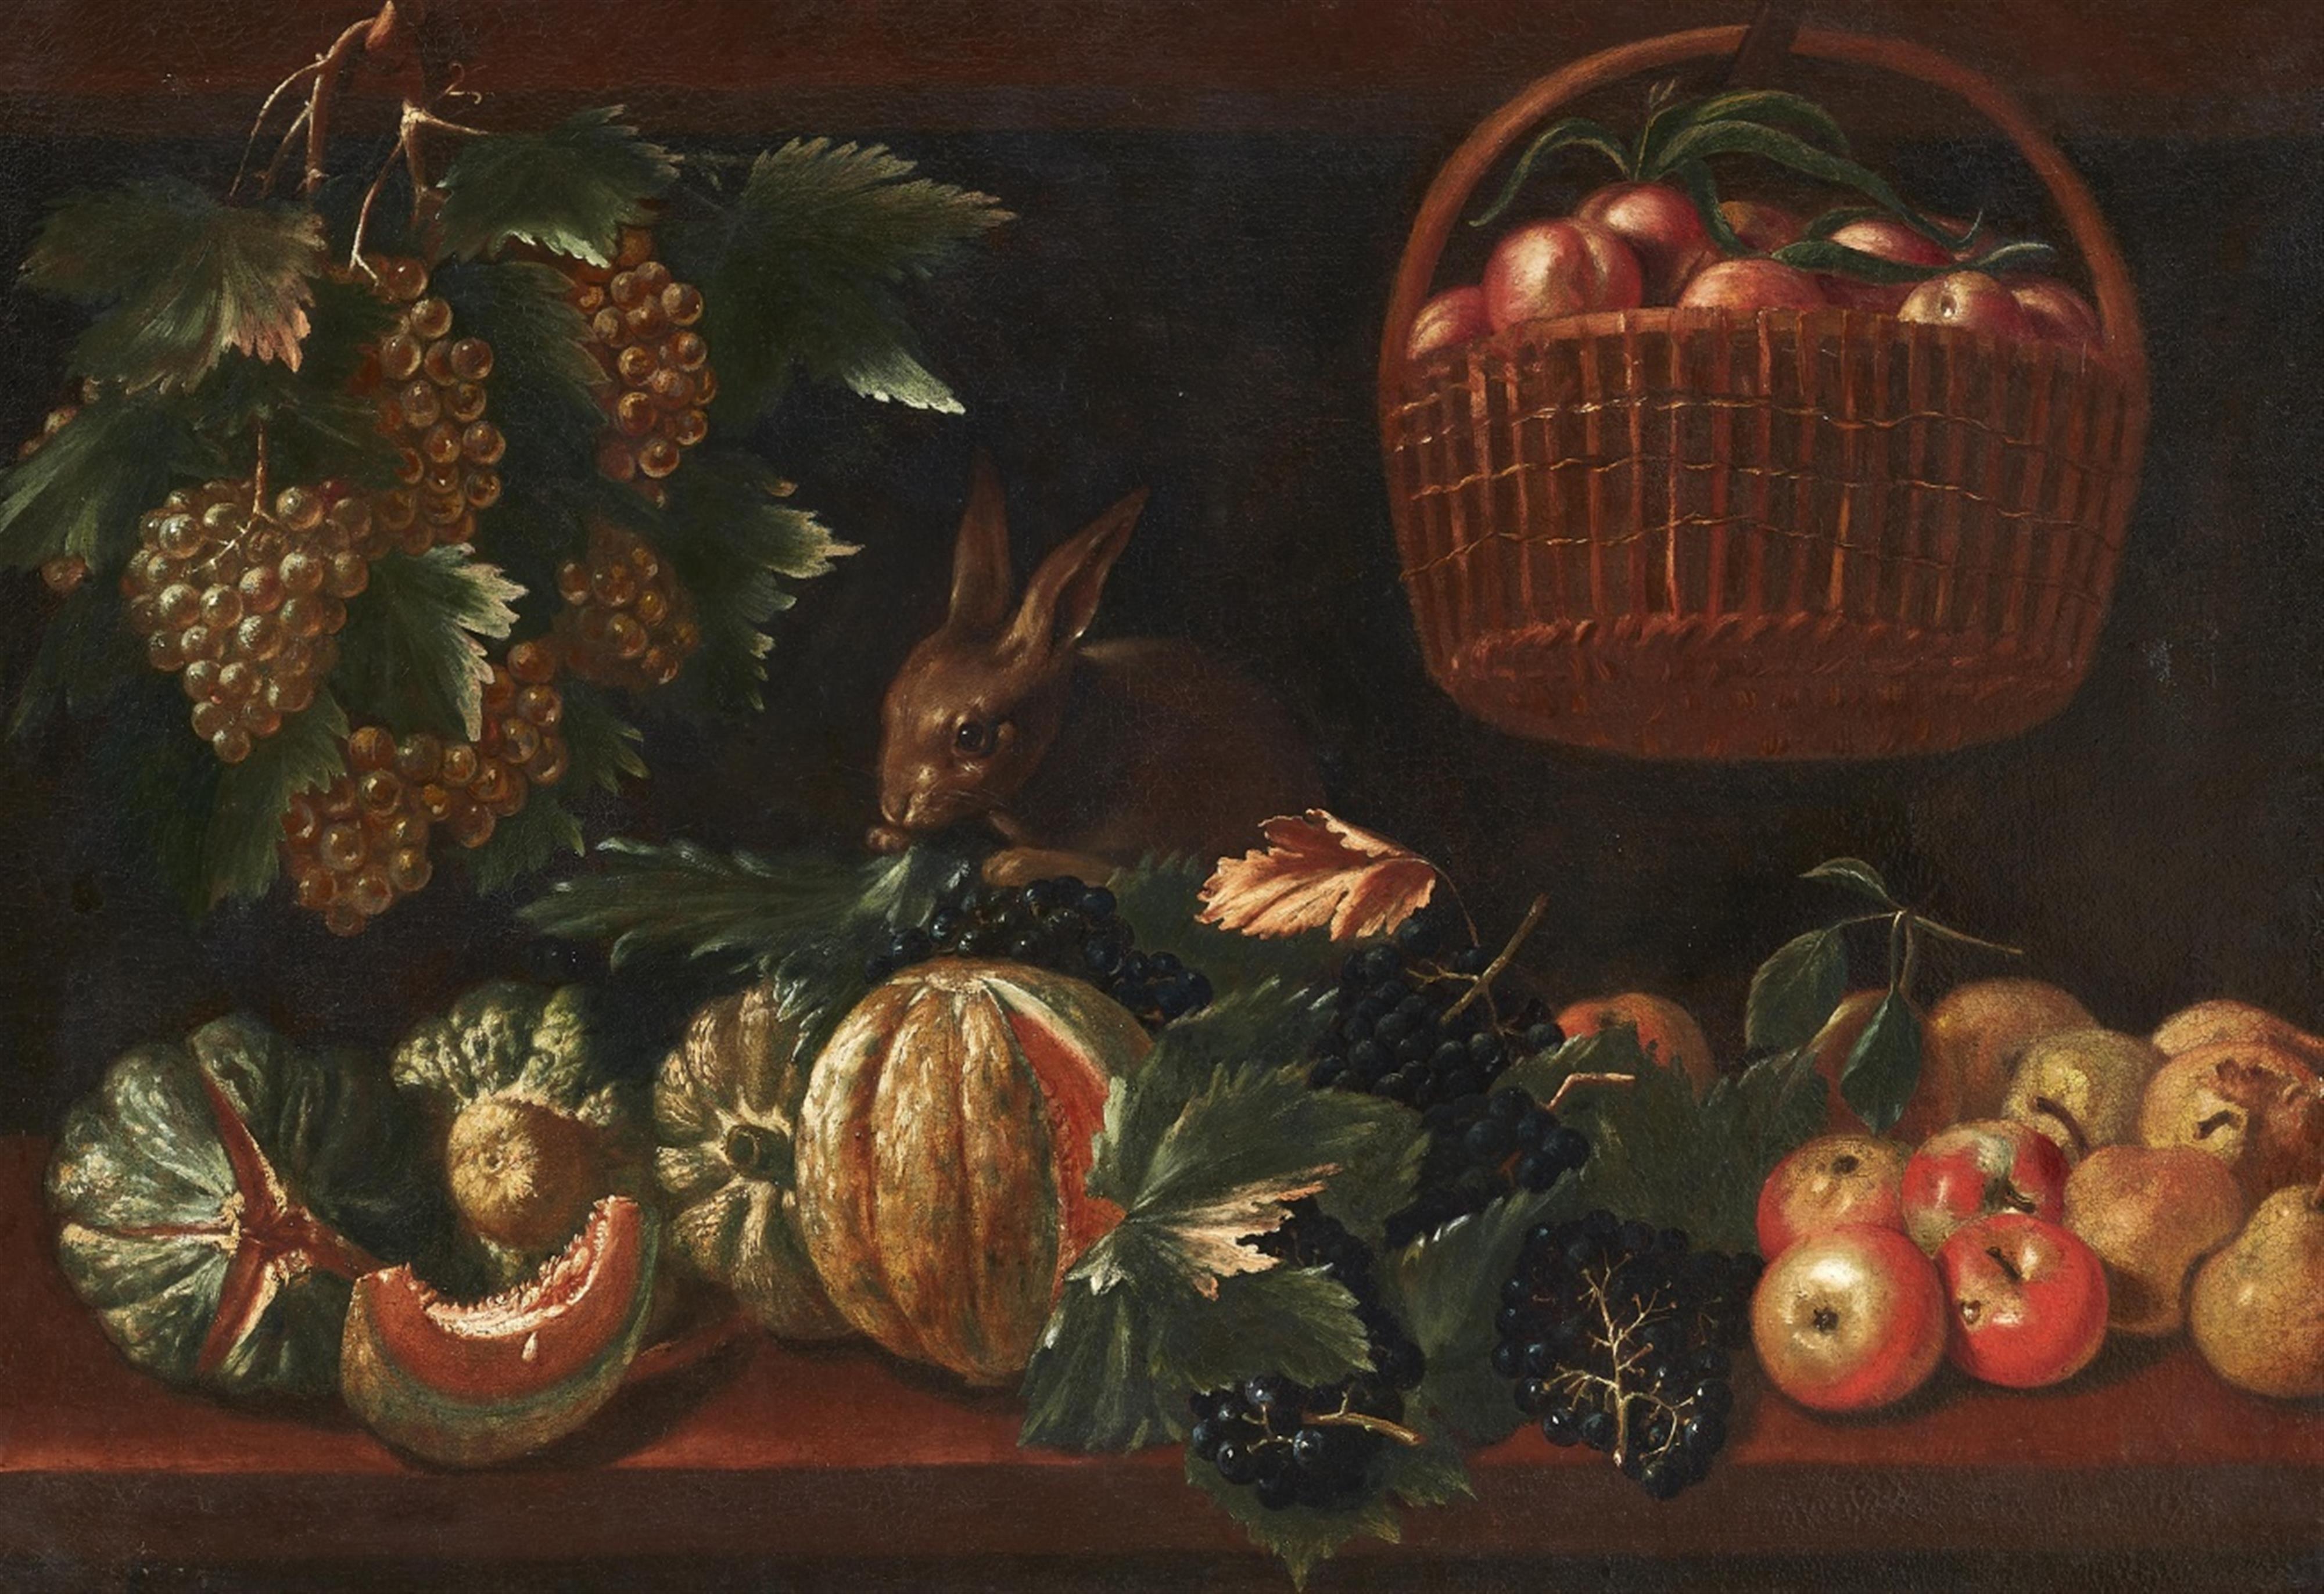 Netherlandish School 17th century - Still Life with Fruits and a Rabbit - image-1